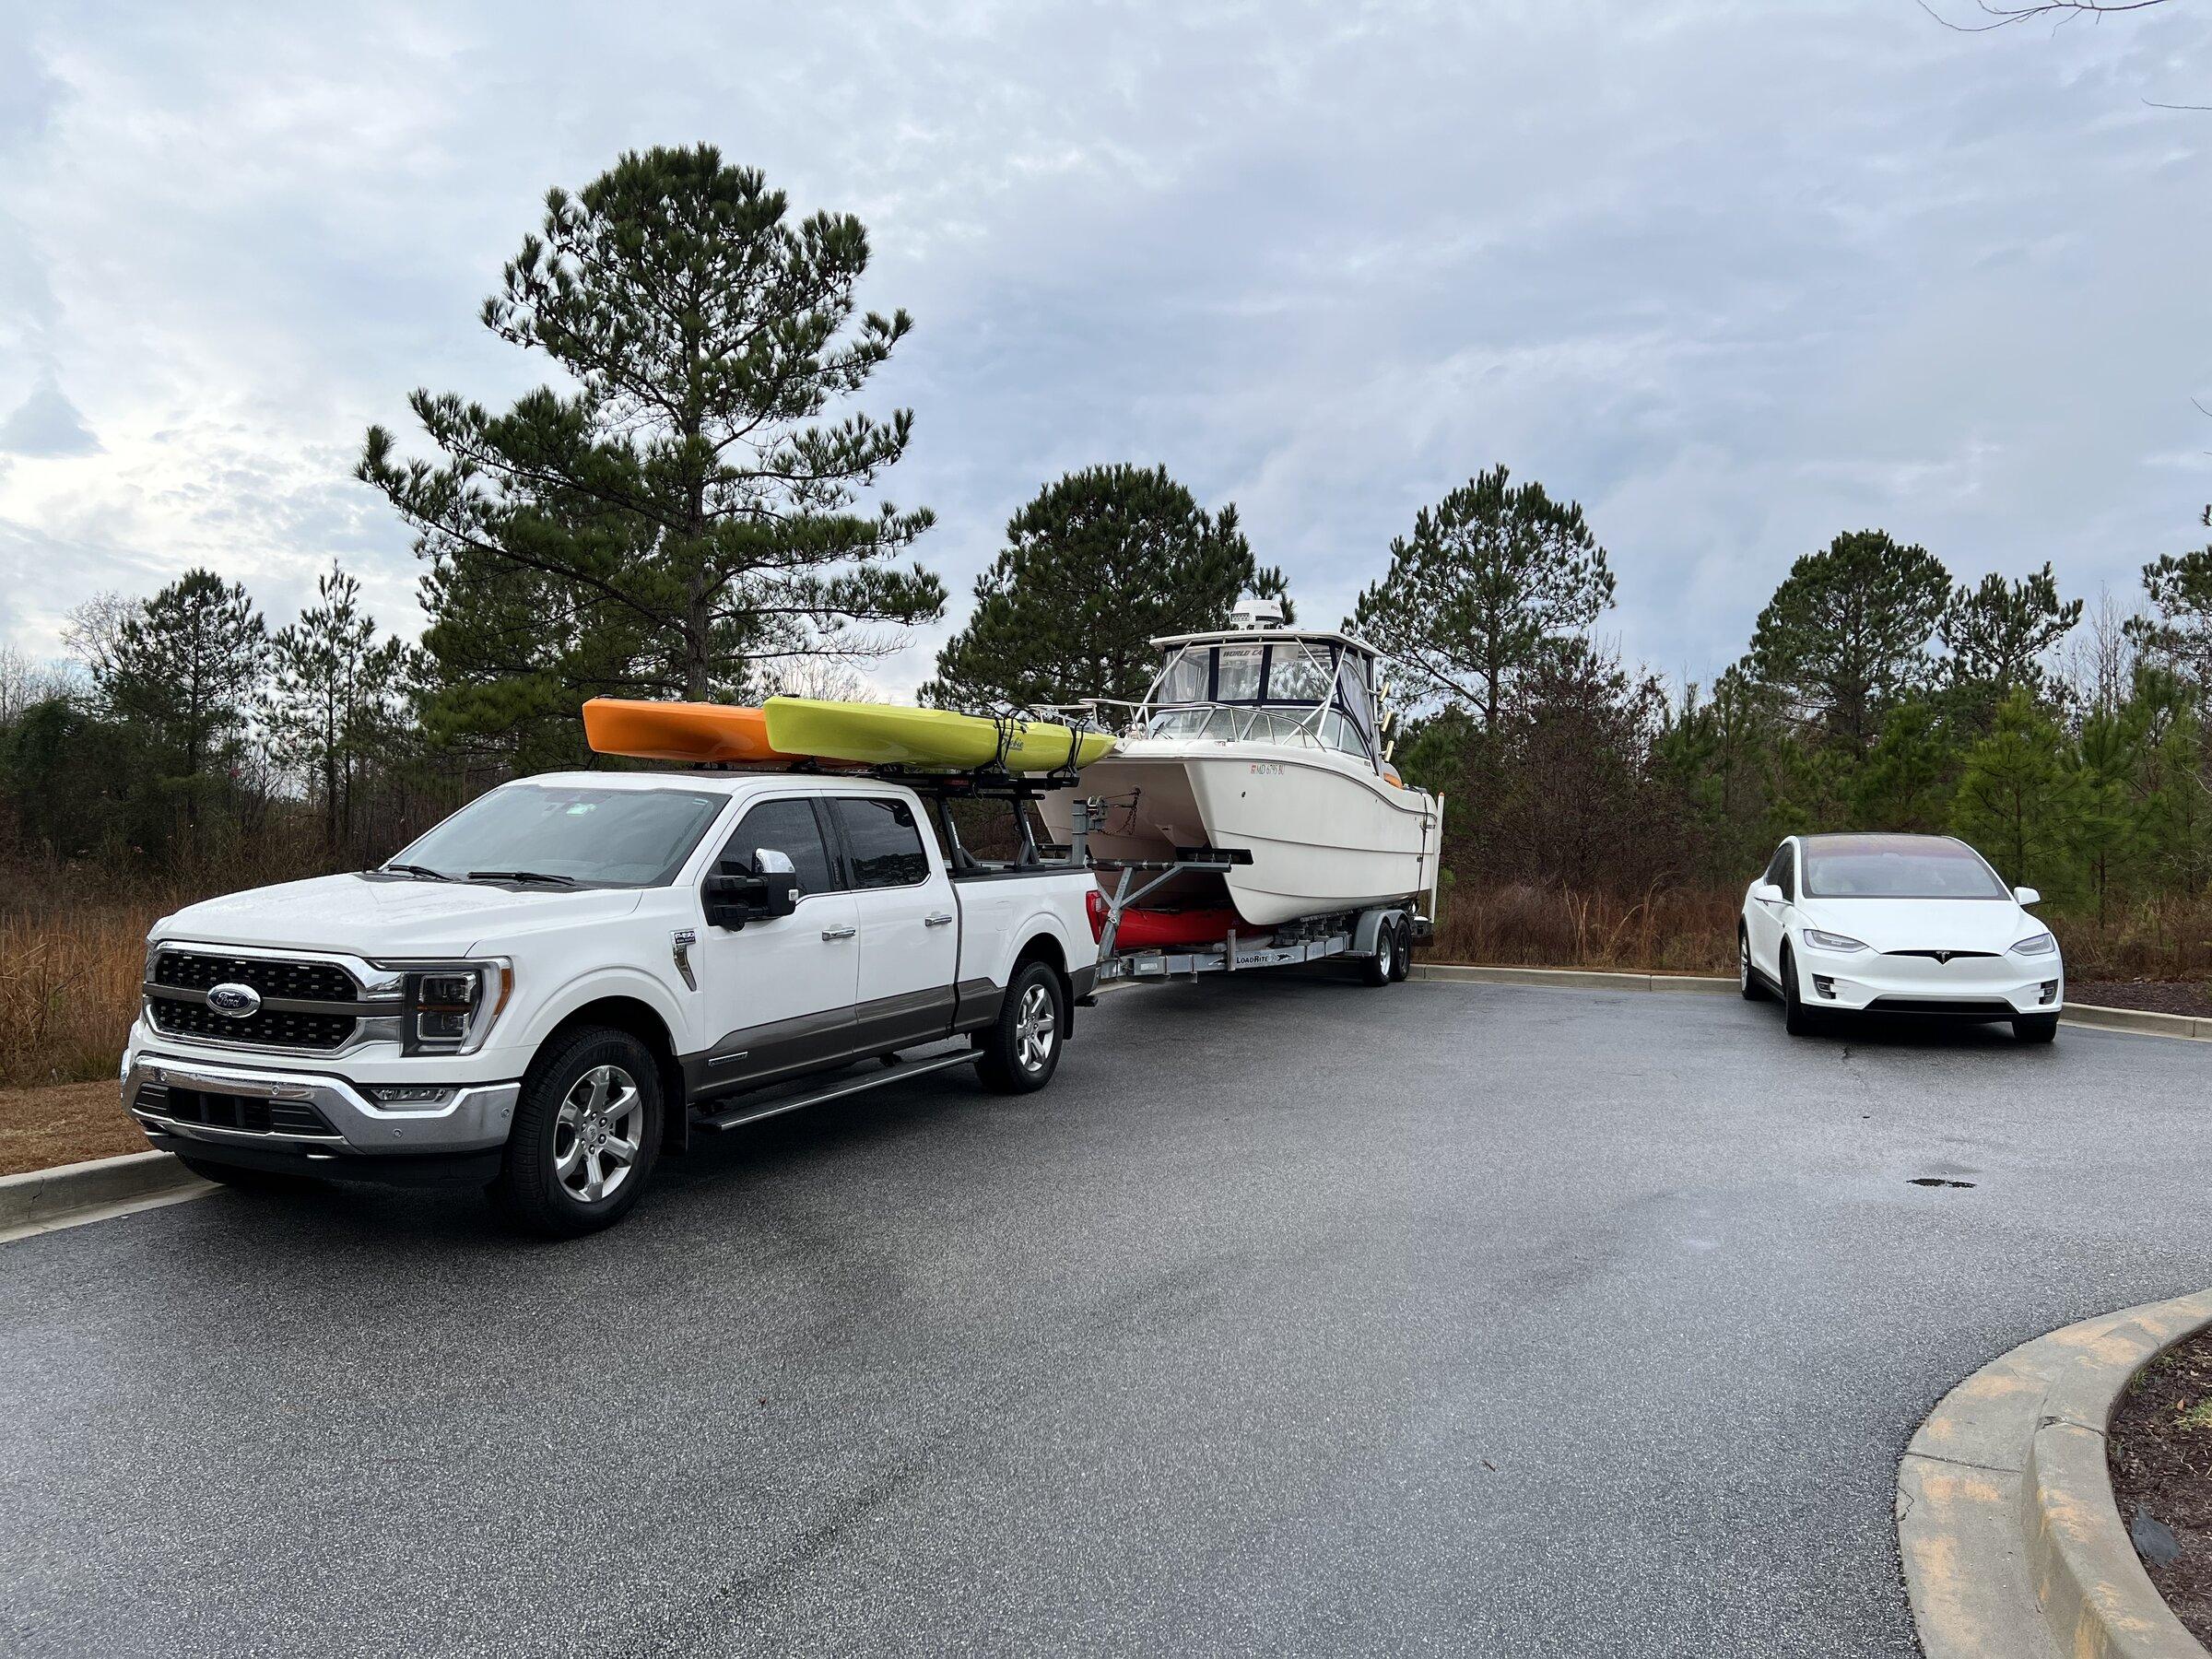 Ford F-150 Lightning Lightning Towing Stats with my 23FB Airstream Trailer 0A3490C8-2A3C-4FA6-BA59-CF086FD89AD0